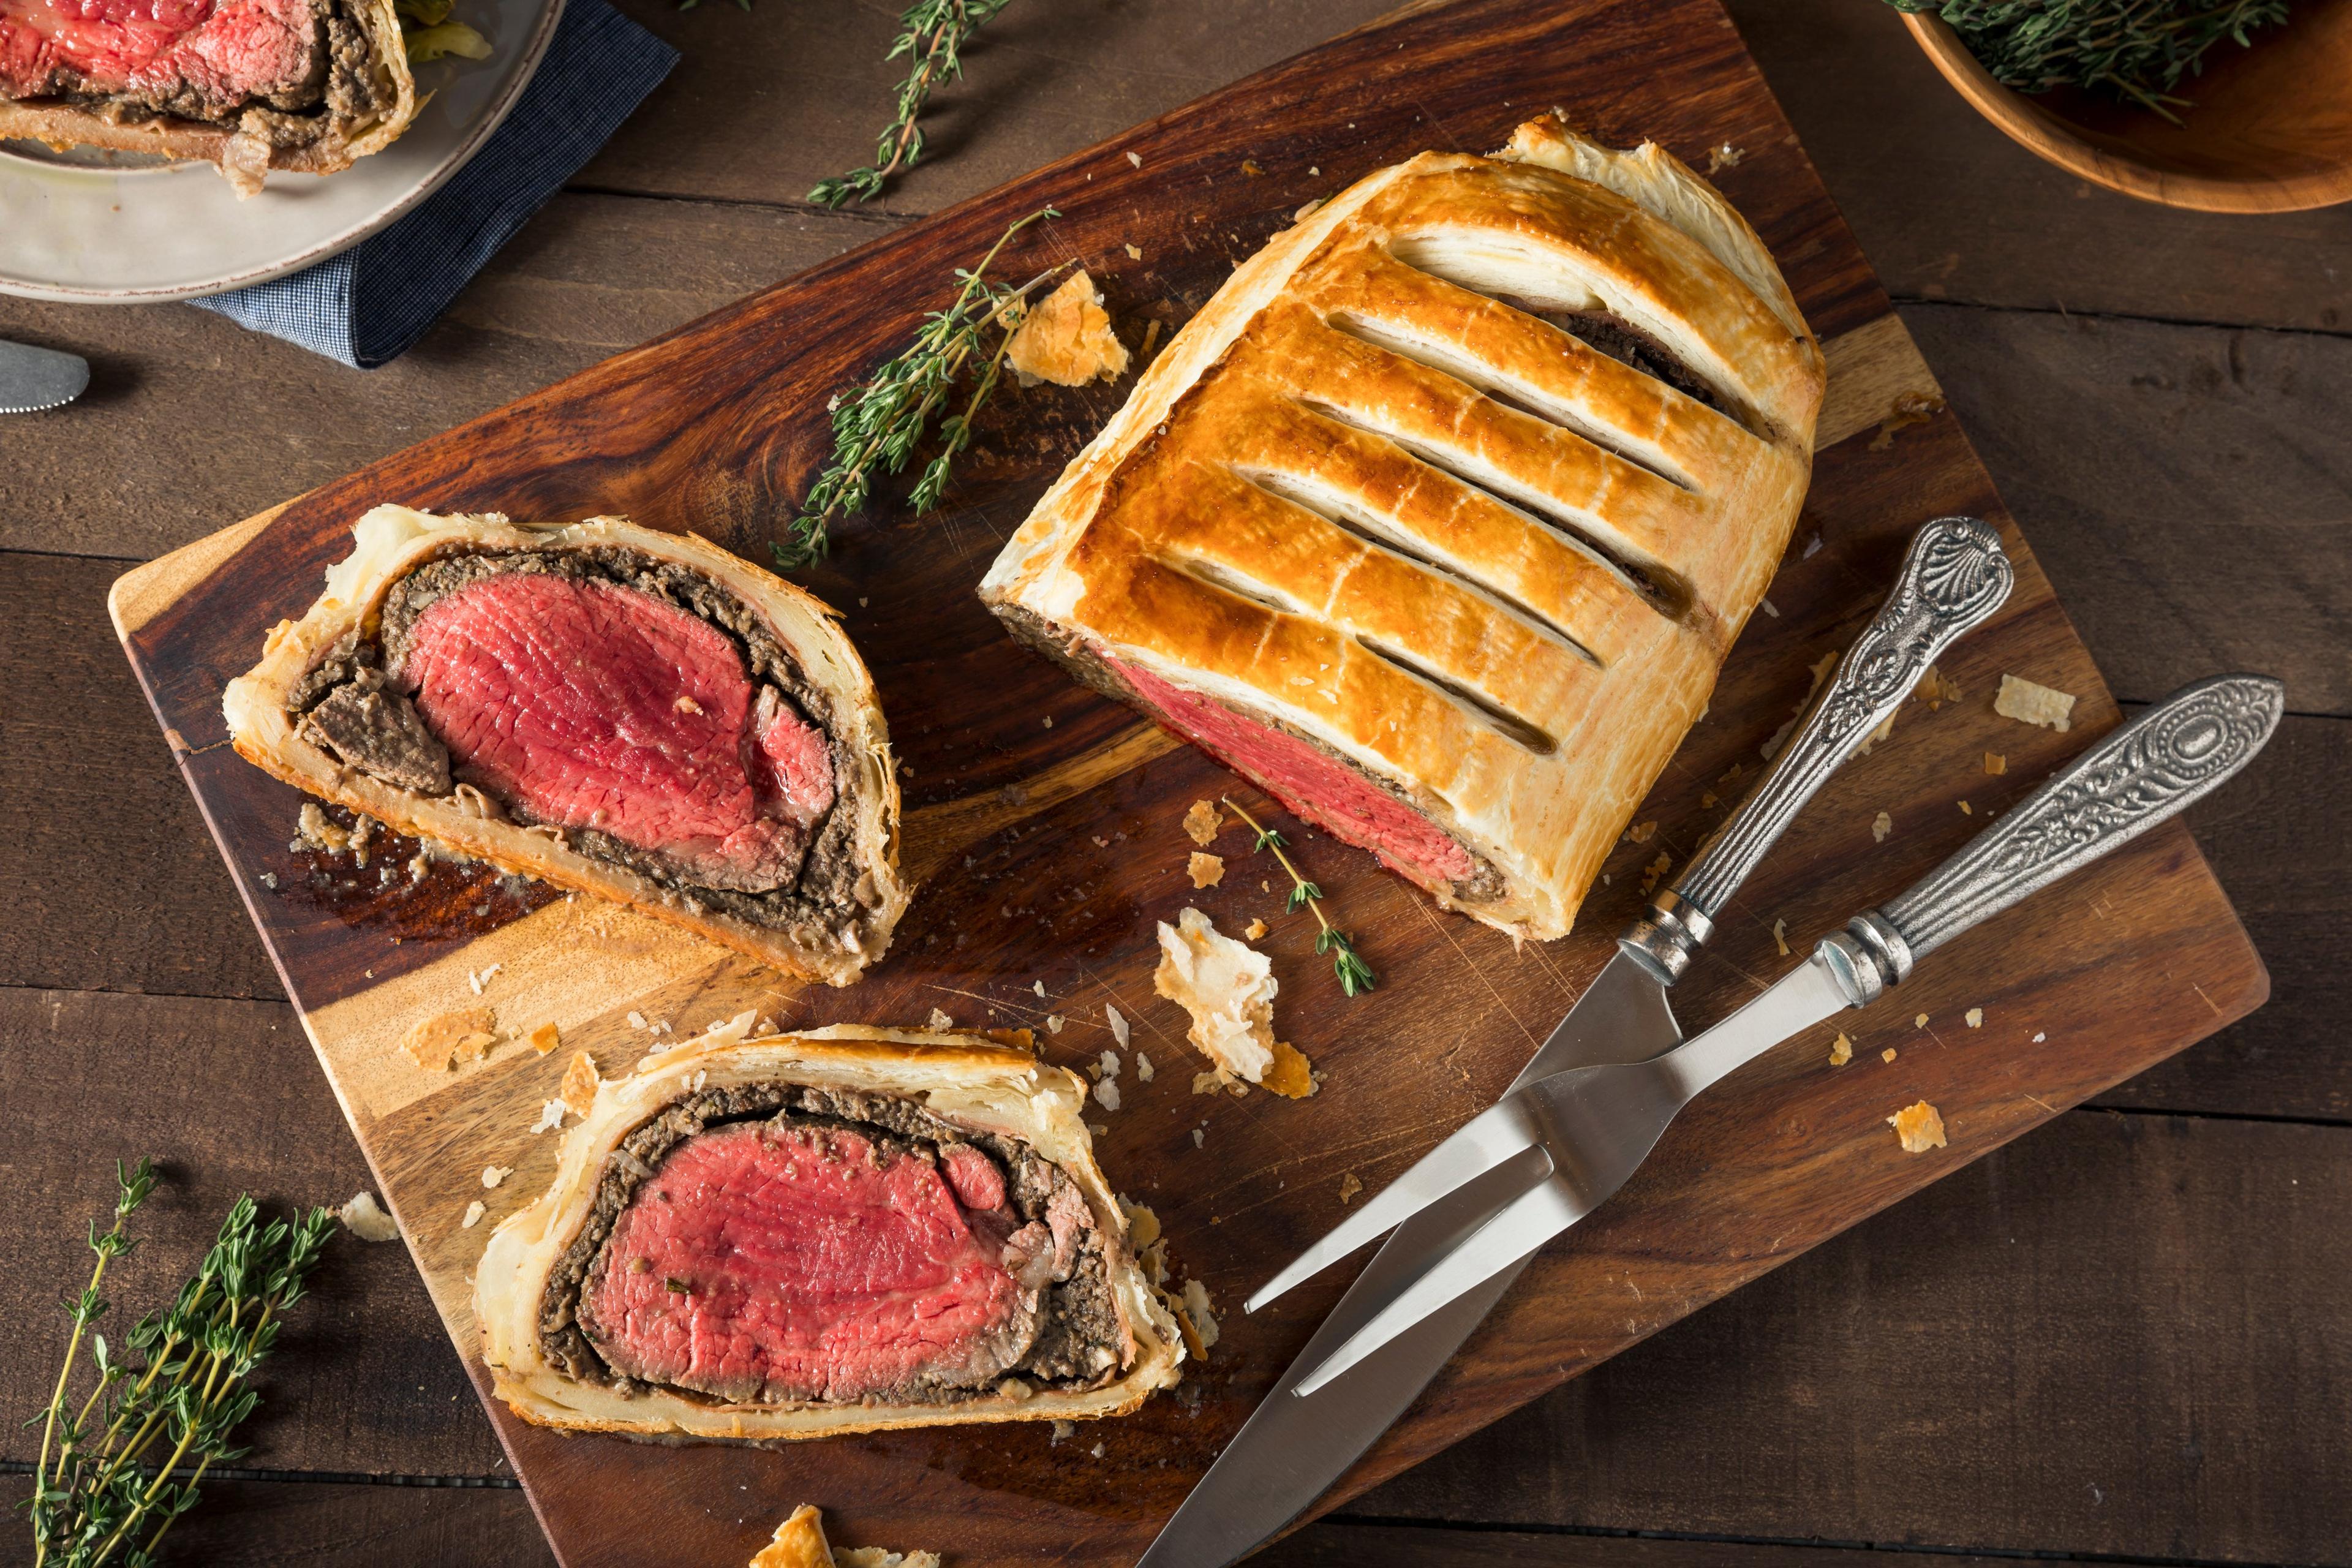 Image of beef wellington on a wooden cutting board